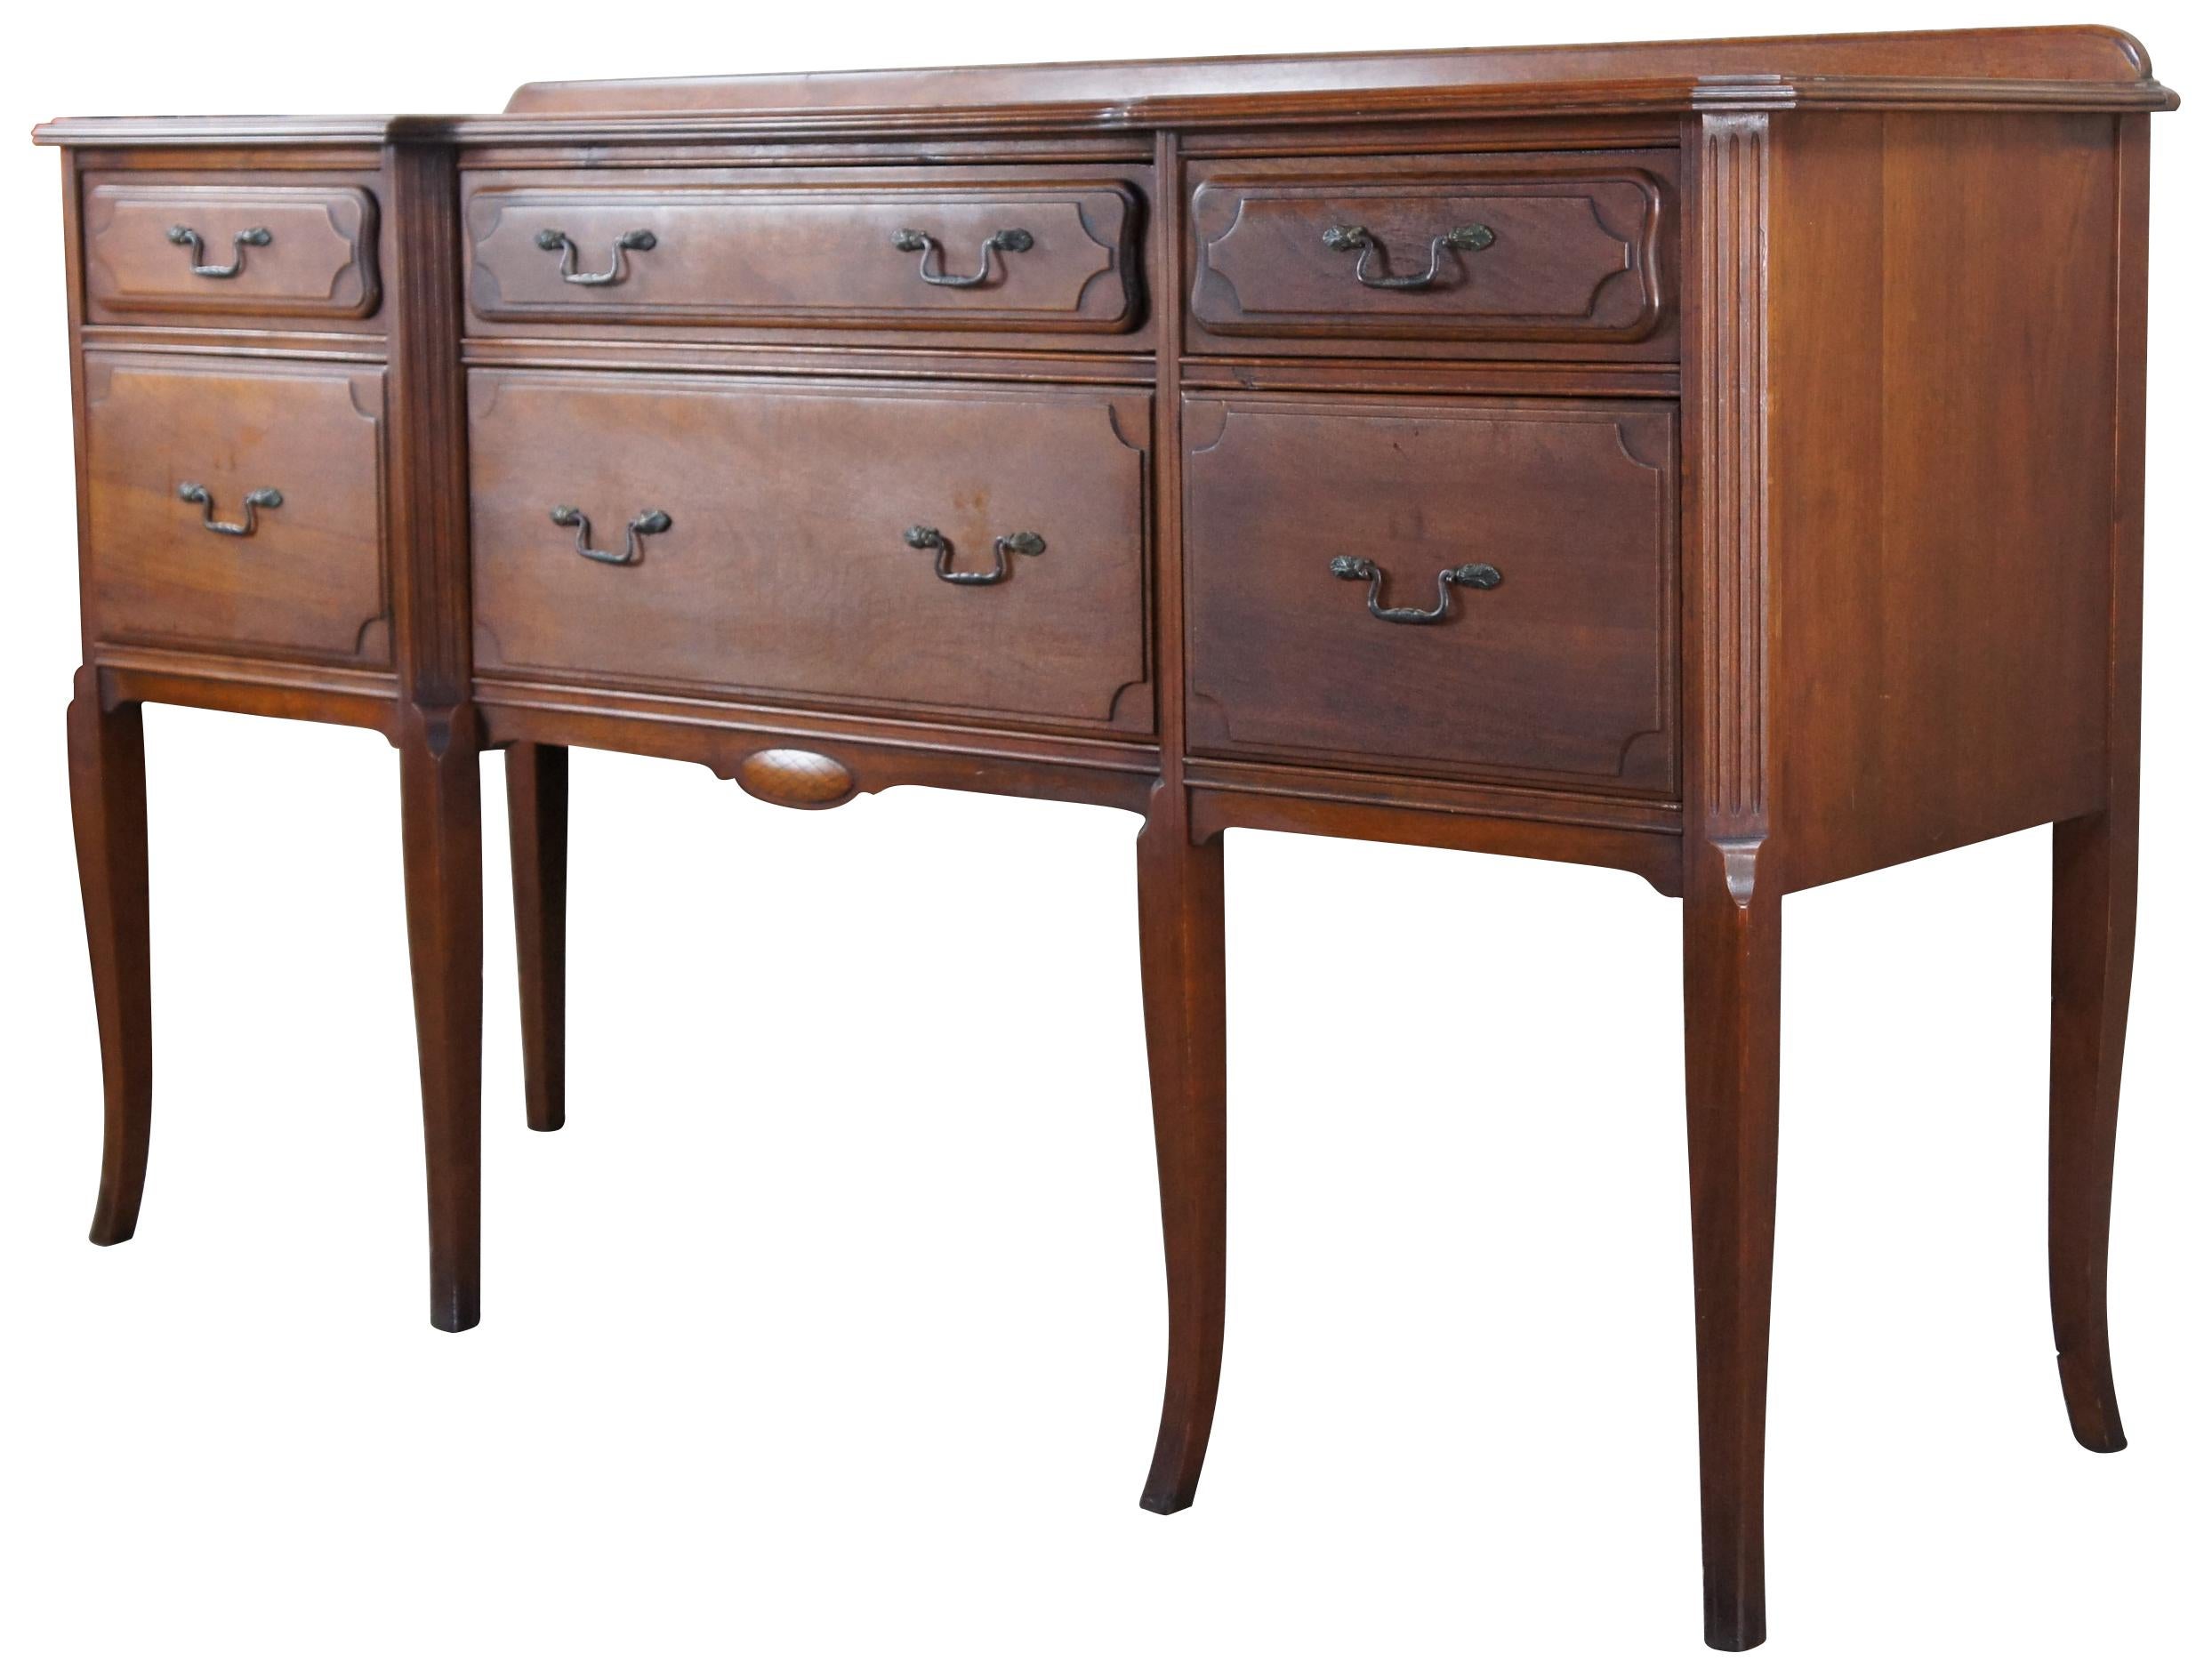 An early 20th century American Sideboard. Made of walnut with rectangular form that features a narrow backsplash and 6 dovetailed drawers of oak construction. Includes Chamfered fluted stiles terminating into rams tongues and tapered flared legs. A